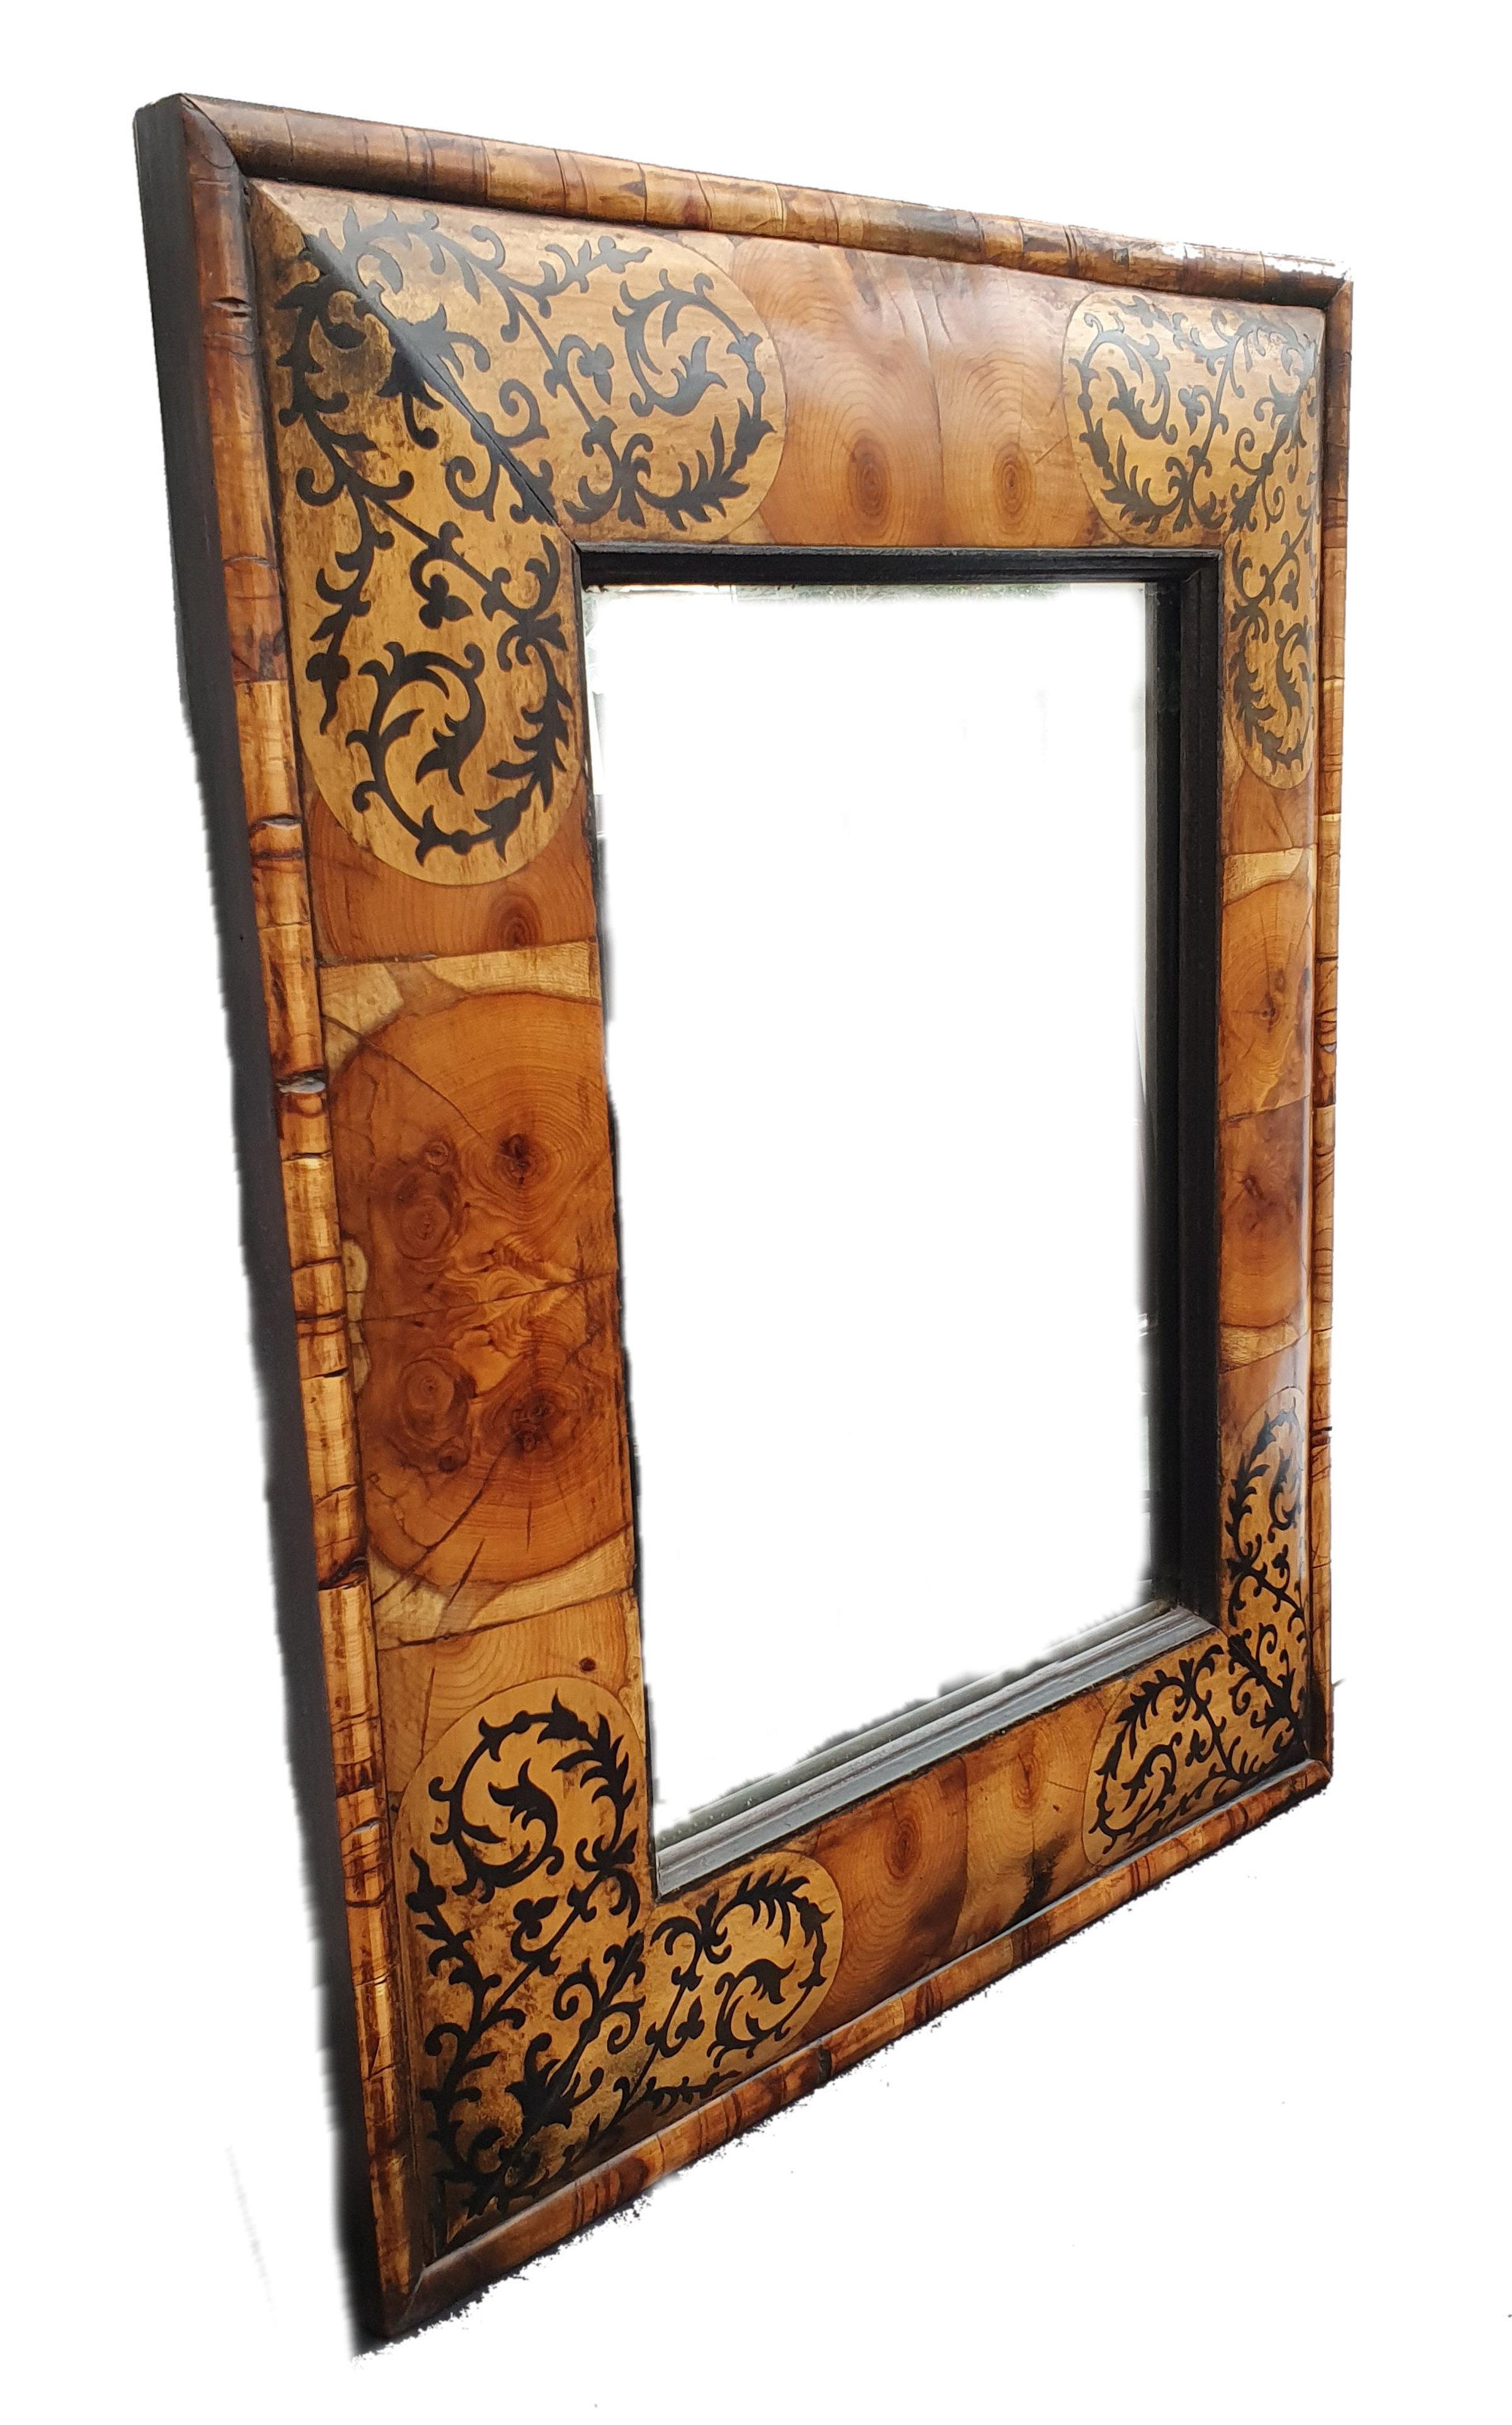 This beautiful marquetry cushion mirror features an intricate marquetry design of inlaid patterns. The mirror is a 17th century style William and Mary mirror, with original design and hand cut marquetry with yew oyster veneer. The basic construction